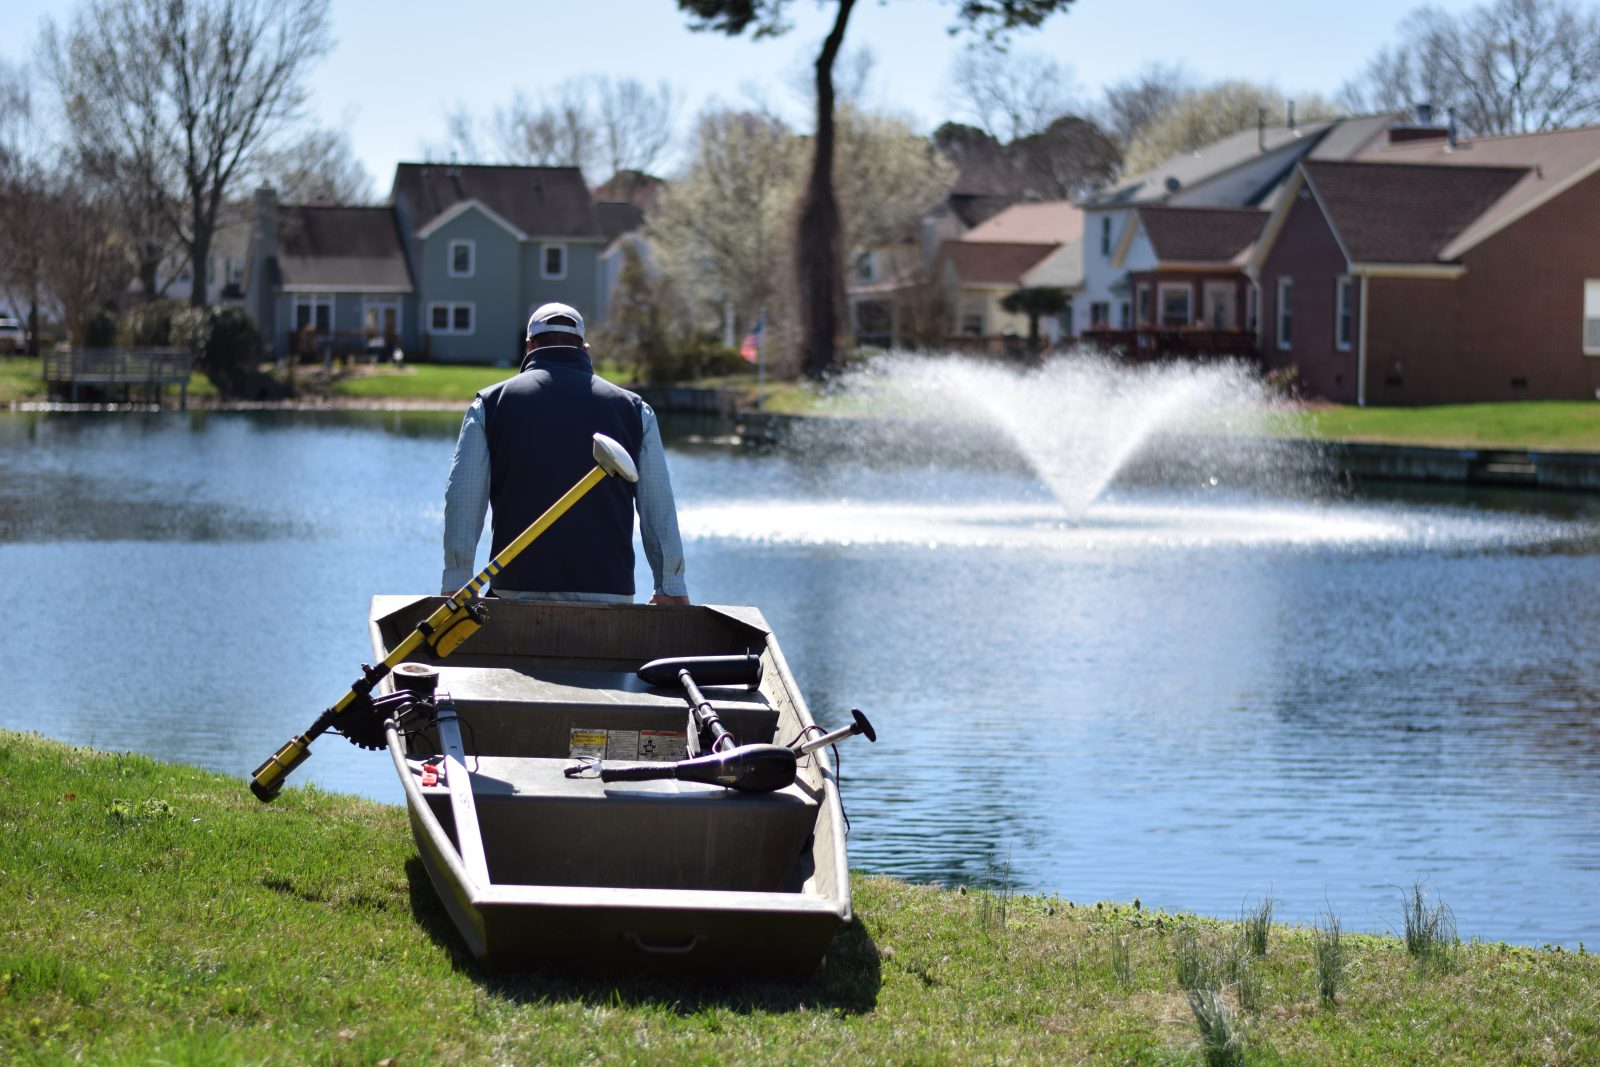 Article #4 lake mapping bathymetry on the job colleague fountains and aeration